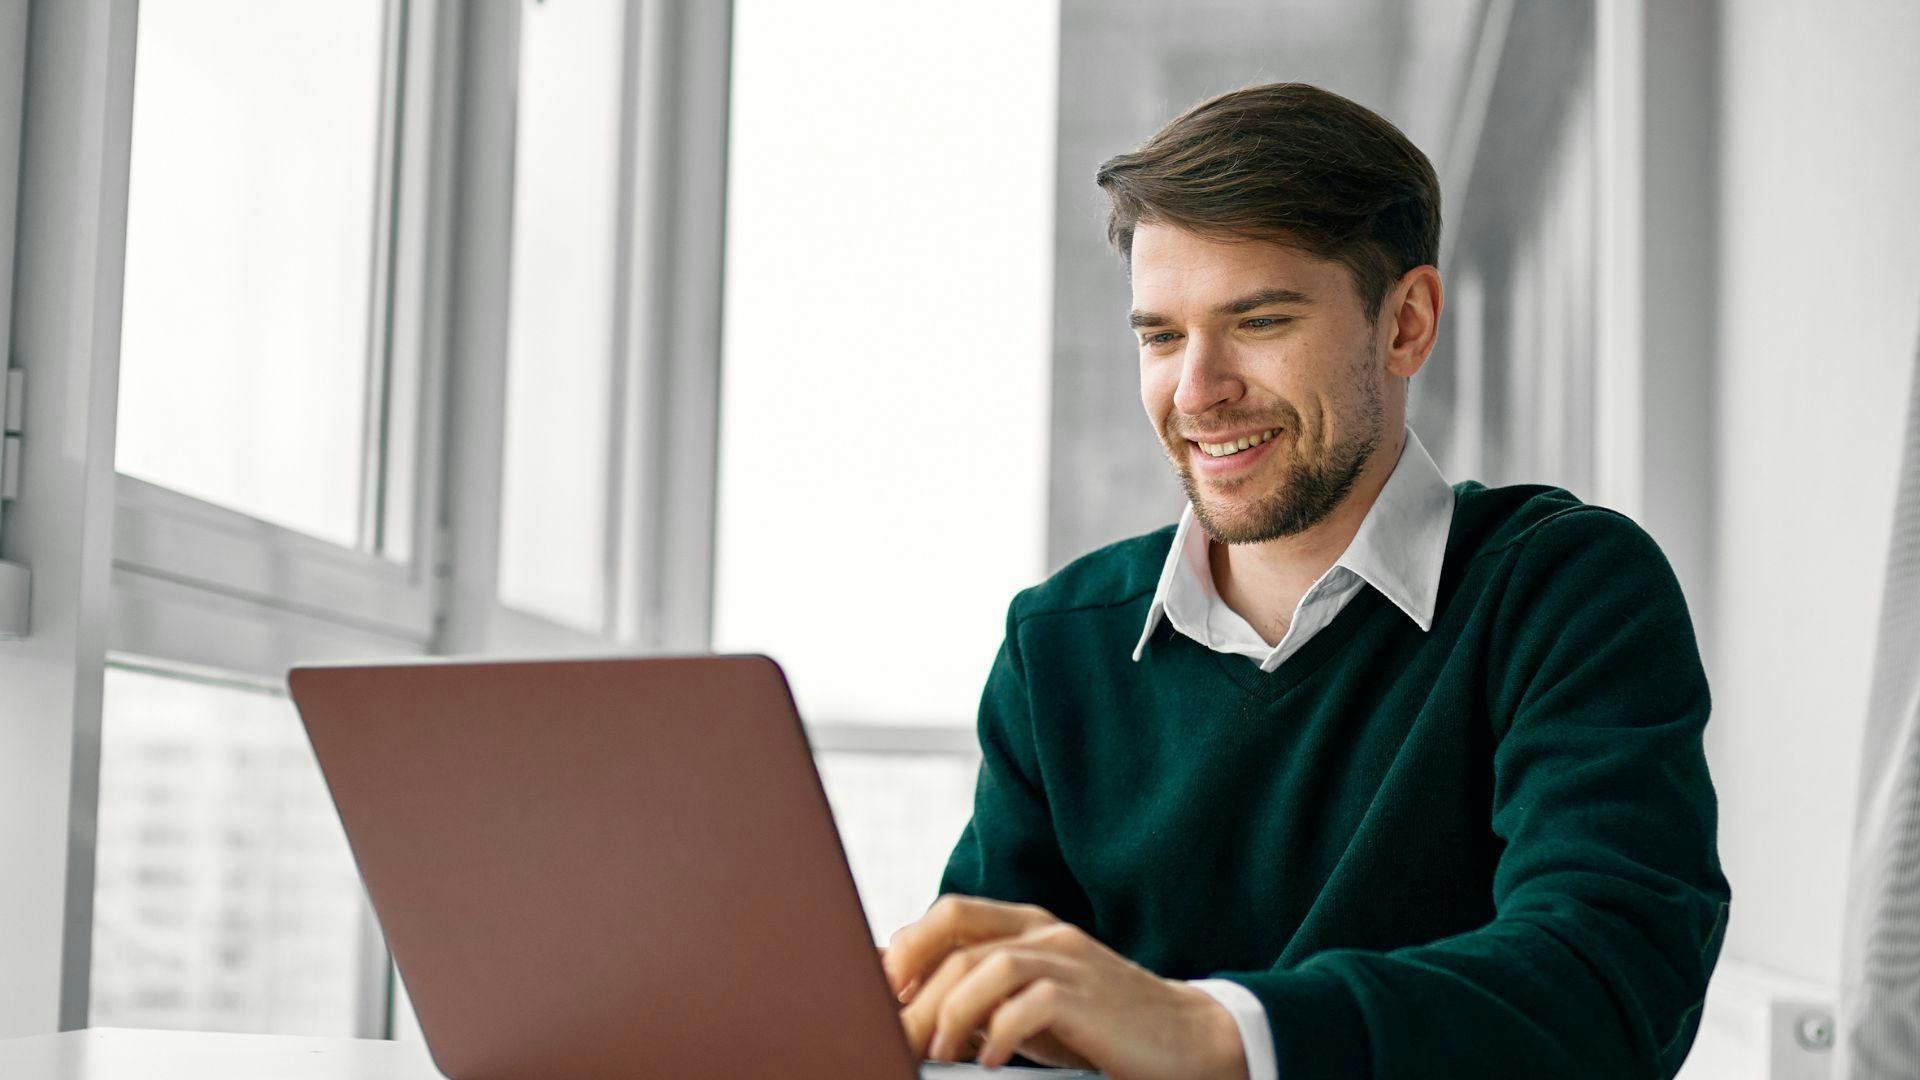 A man smiling while using a laptop to work or browse the internet.